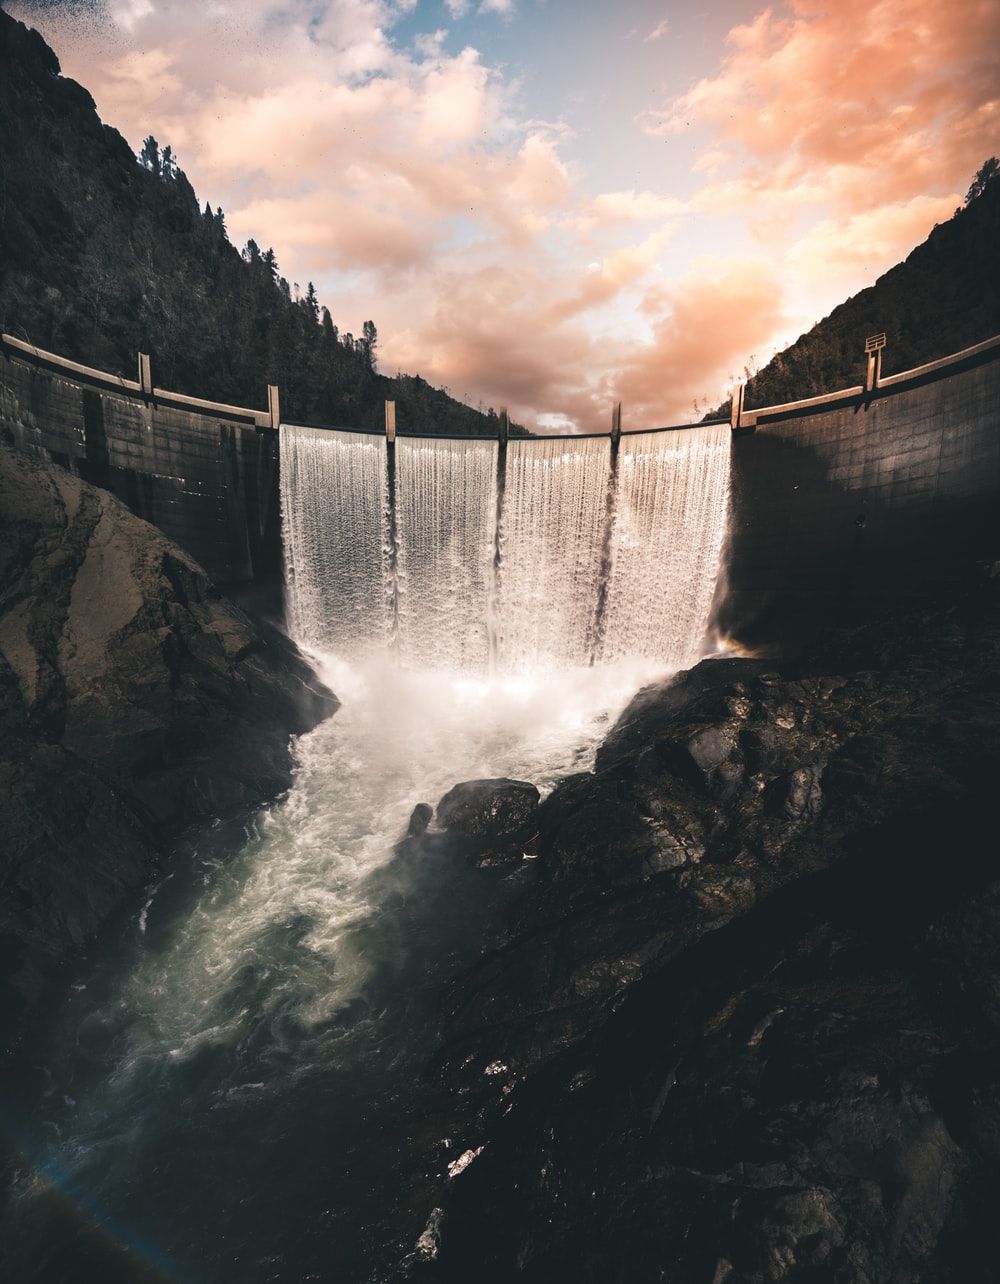 Dam Picture. Download Free Image